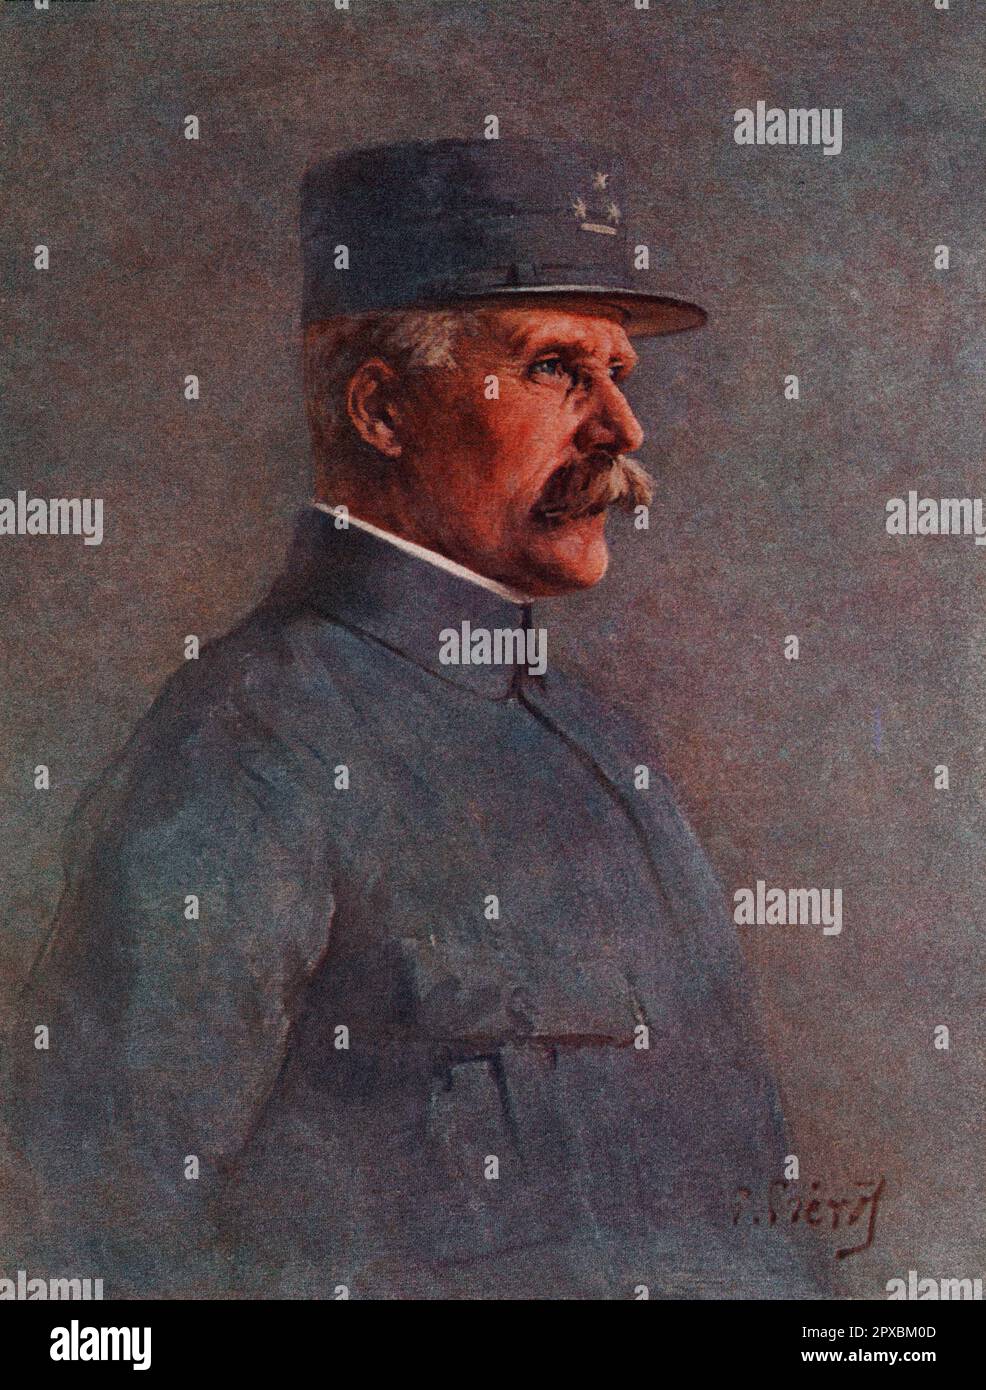 French general Petain.  Henri Philippe Benoni Omer Pétain (1856–1951), commonly known as Philippe Pétain or Marshal Pétain was a French general who attained the position of Marshal of France at the end of World War I, during which he became known as 'the Lion of Verdun' (French: le lion de Verdun). From 1940 to 1944, during World War II, he served as head of the collaborationist regime of Vichy France. Pétain, who was 84 years old when he became Prime Minister, remains the oldest person to become the head of state of France. Stock Photo